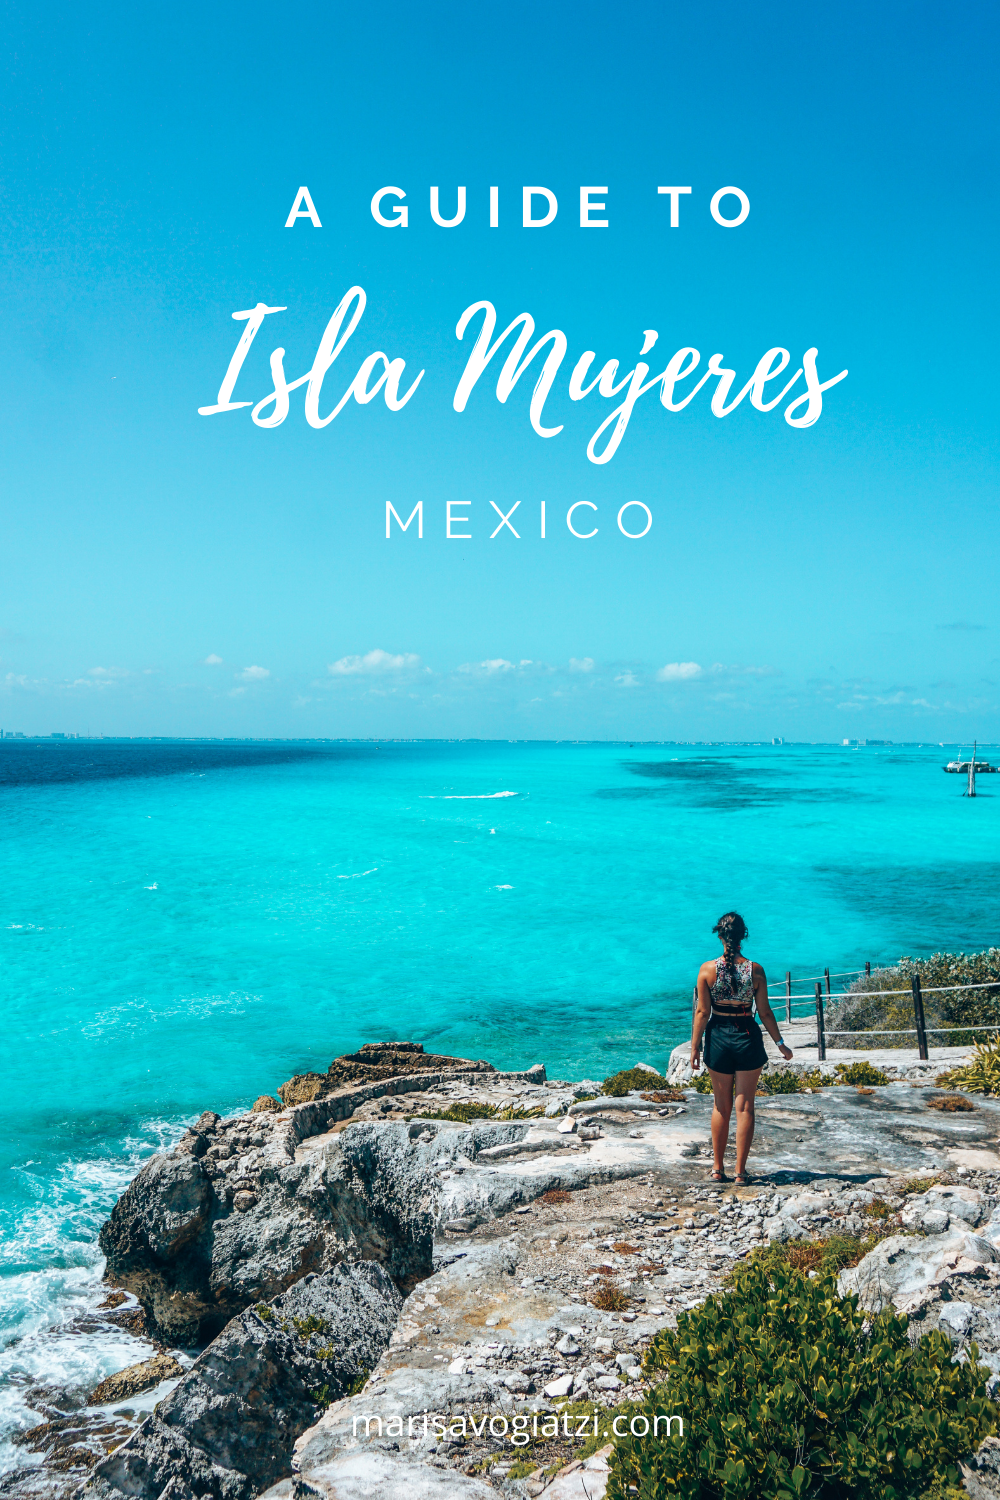 What Does Isla Mujeres Mean?